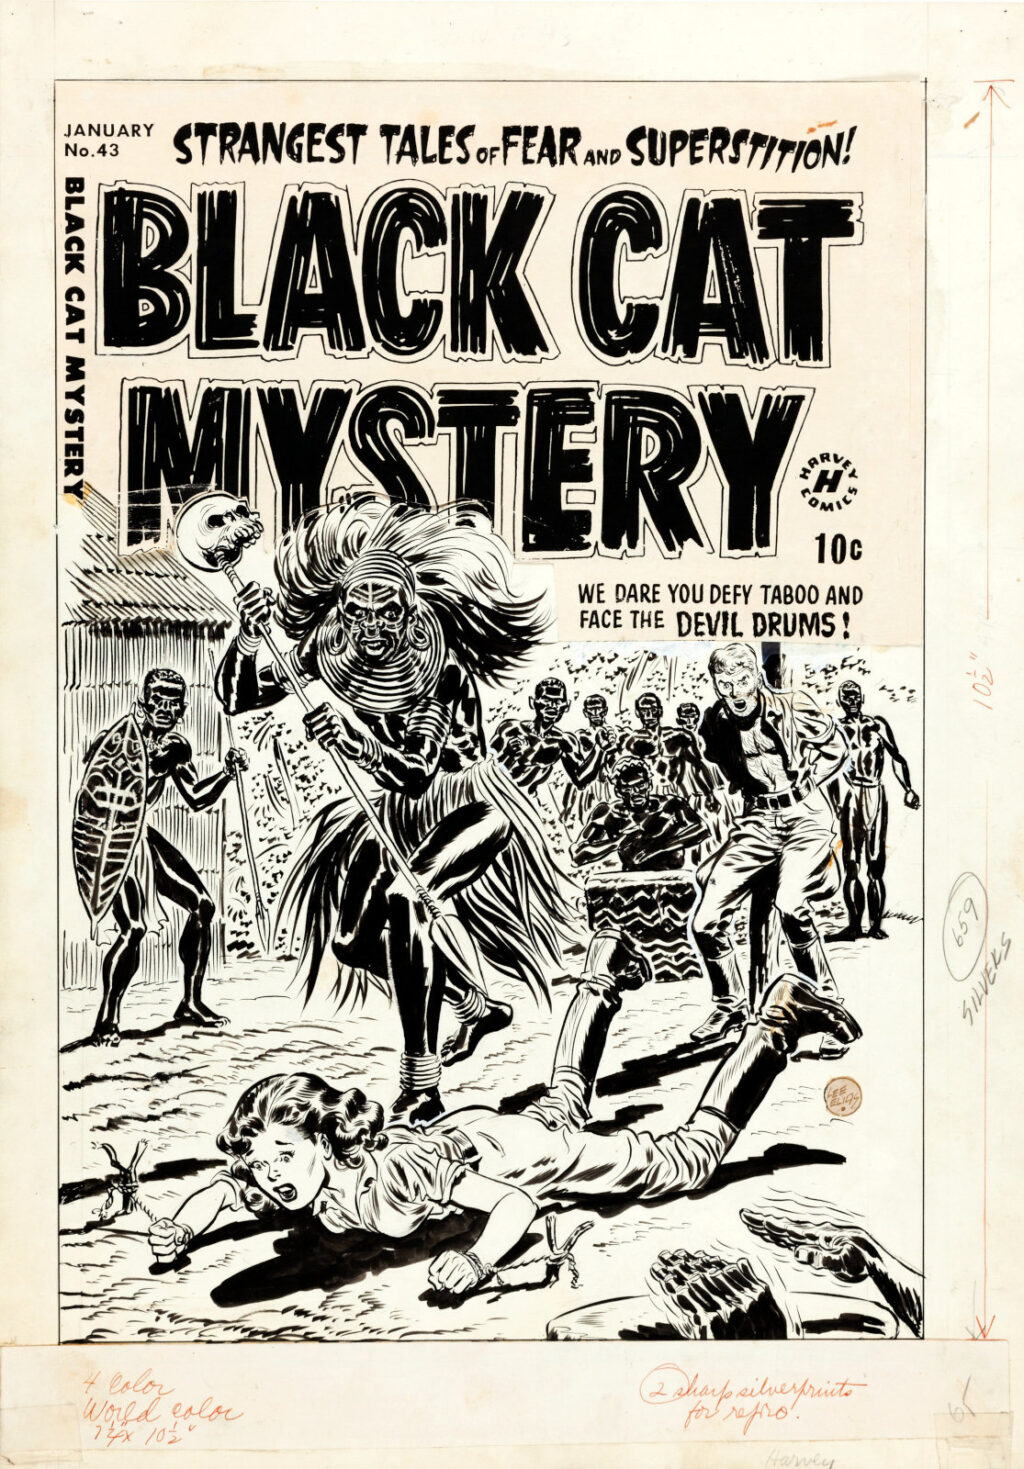 Black Cat Mystery Comics issue 43 cover by Lee Elias